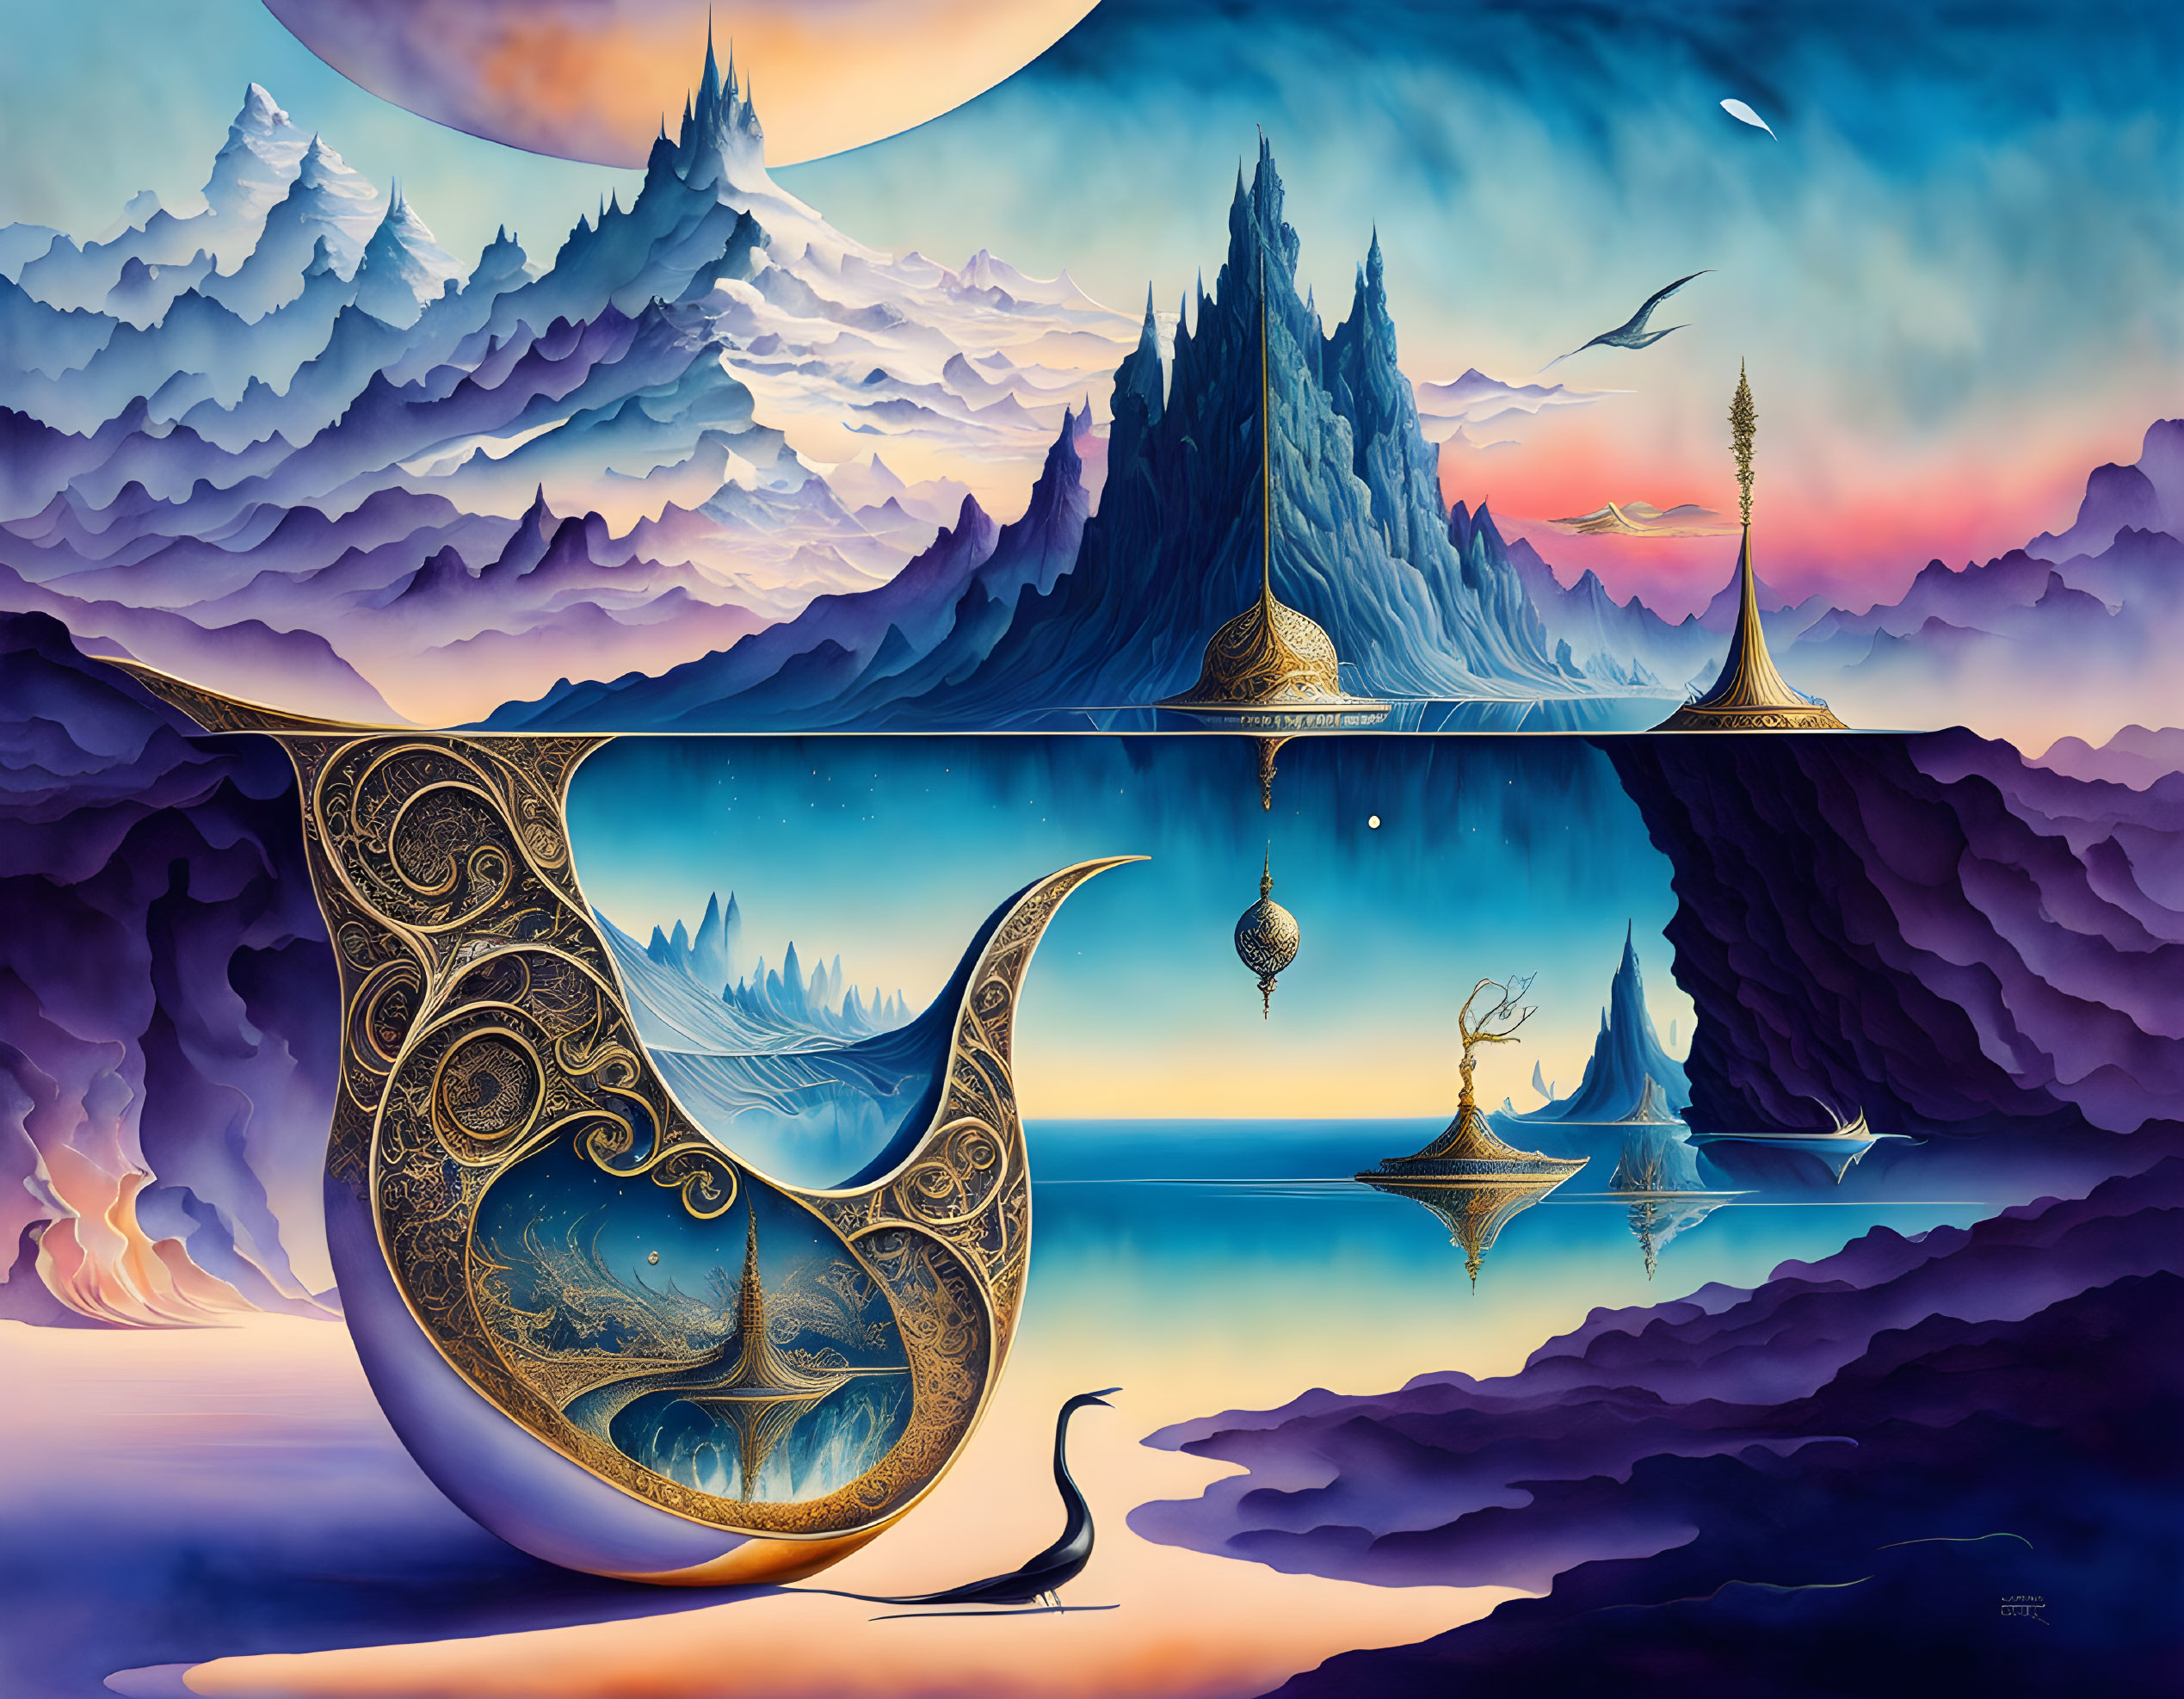 Surreal landscape with ornate boats, mountains, and reflective scenery